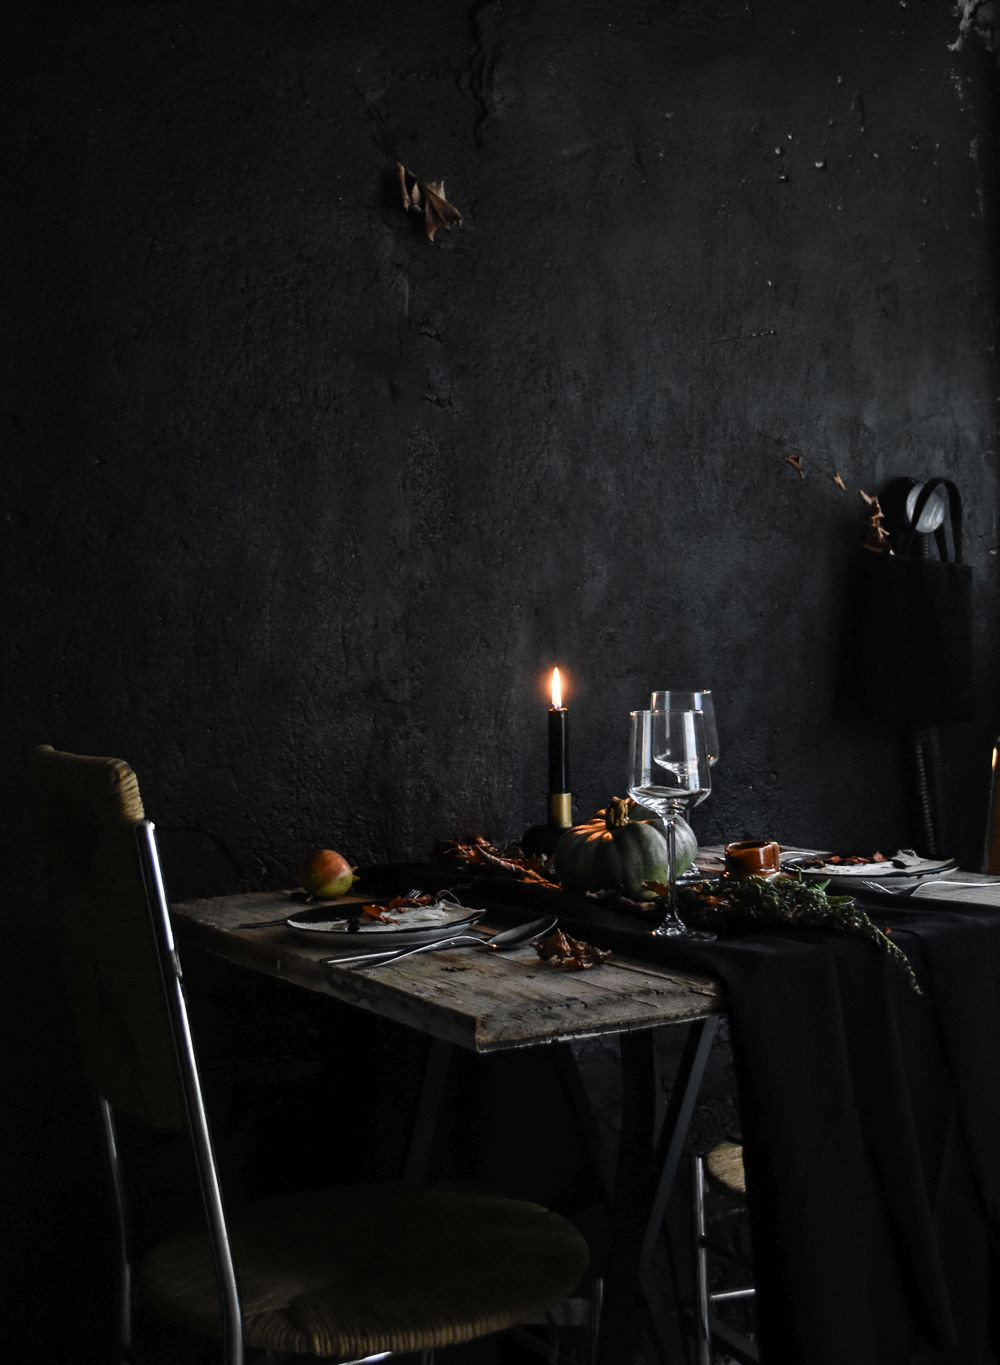 Halloween Table Settings
 Conjure up a Dramatic Halloween Table Setting